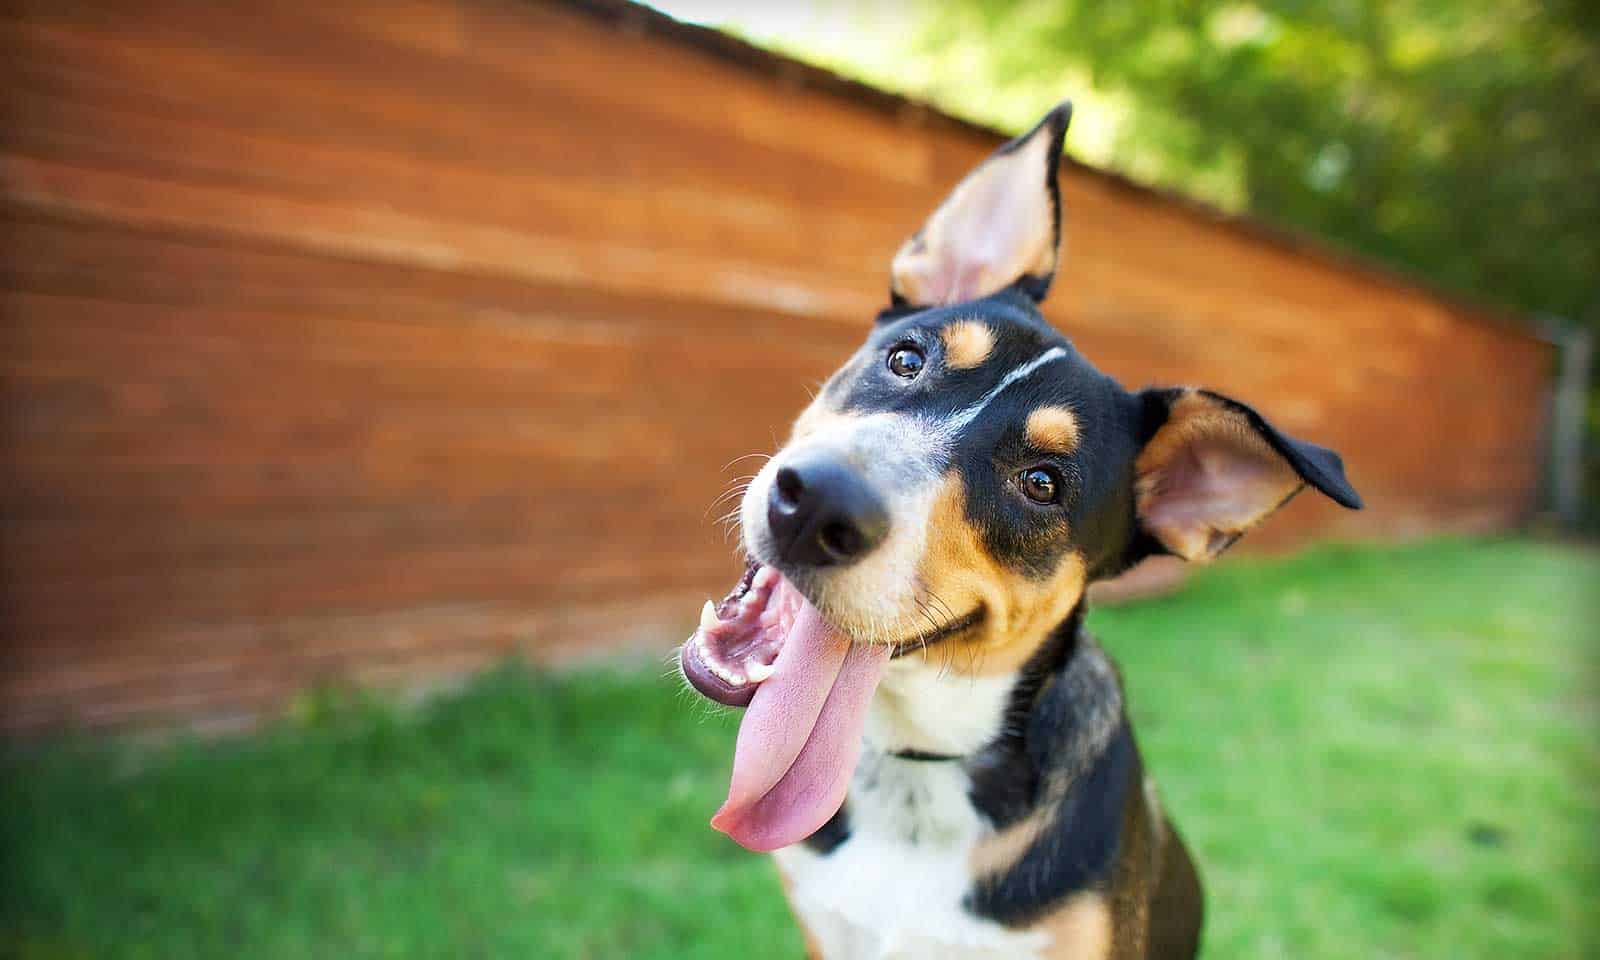 A dog with its tongue hanging out